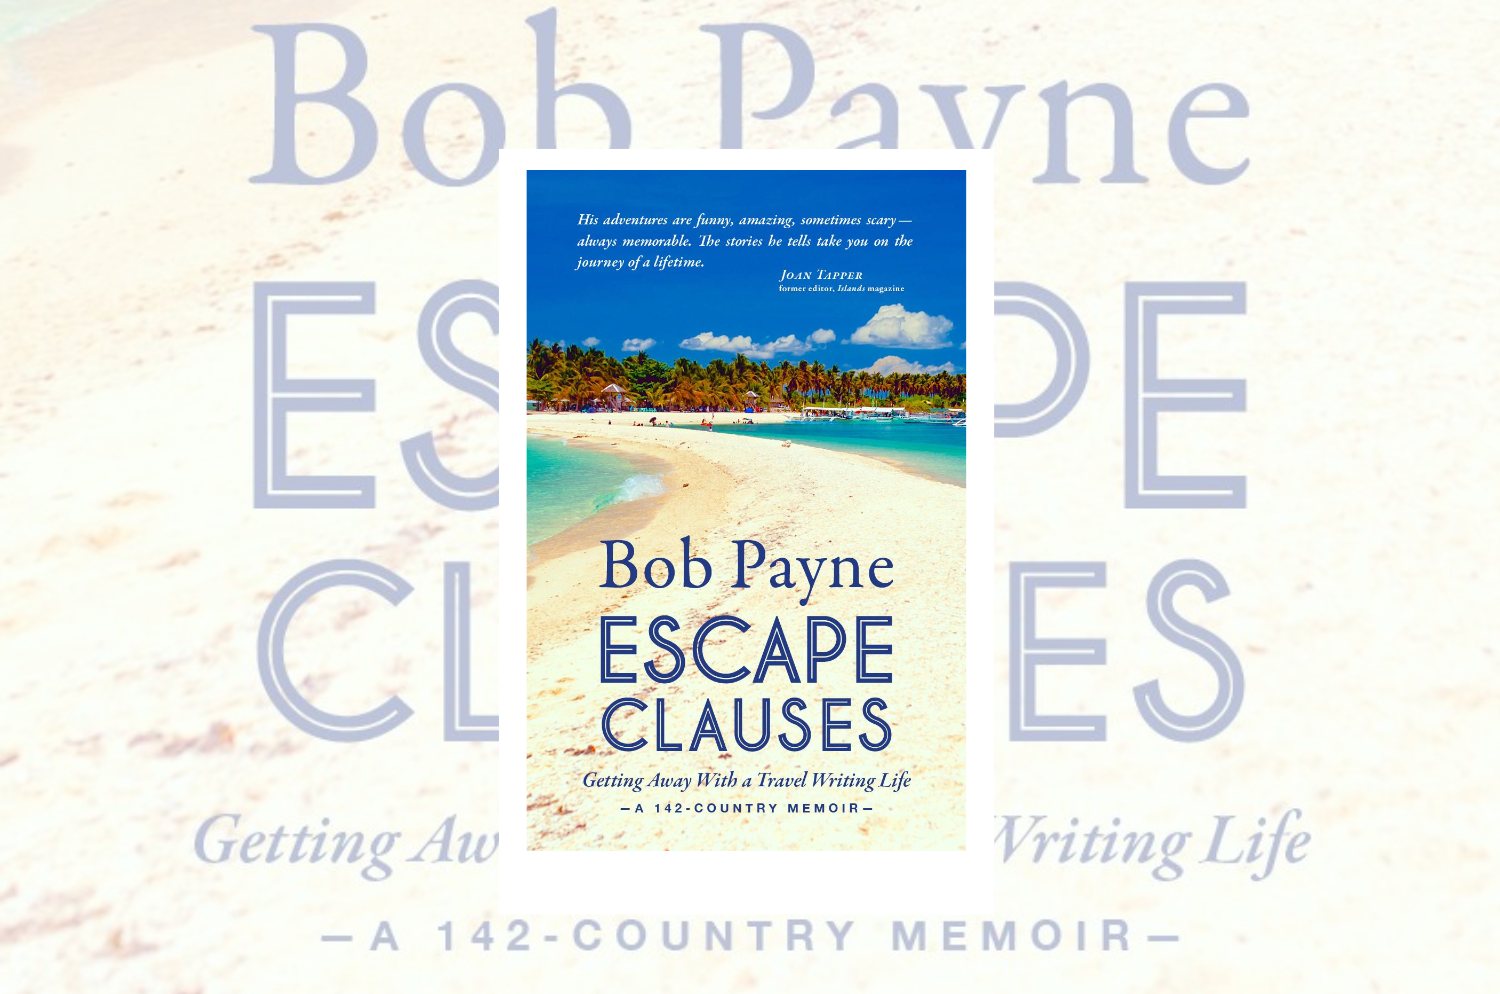 Escape Clauses: Getting Away With A Travel Writing Life - A 142-Country Memoir